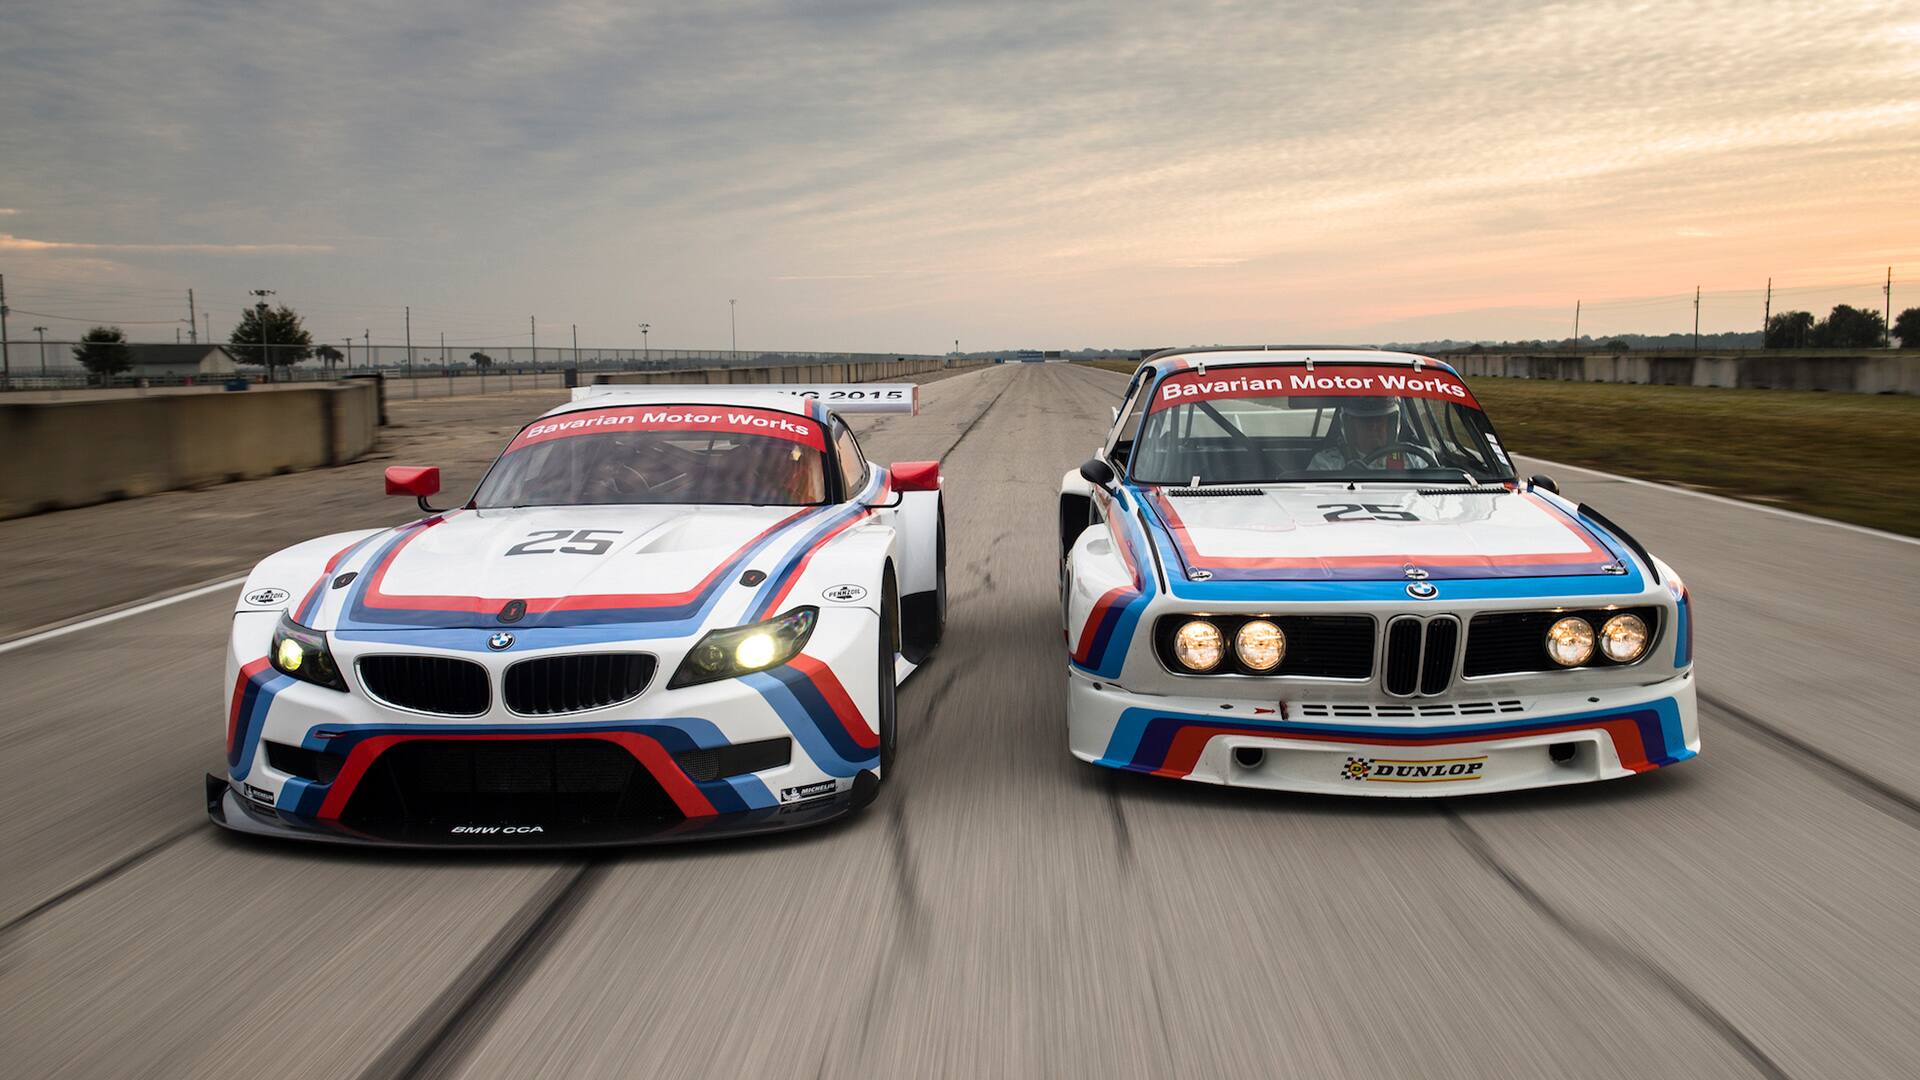 A new BMW M car and heritage BMW M car, both white with iconic red, purple and blue stripes